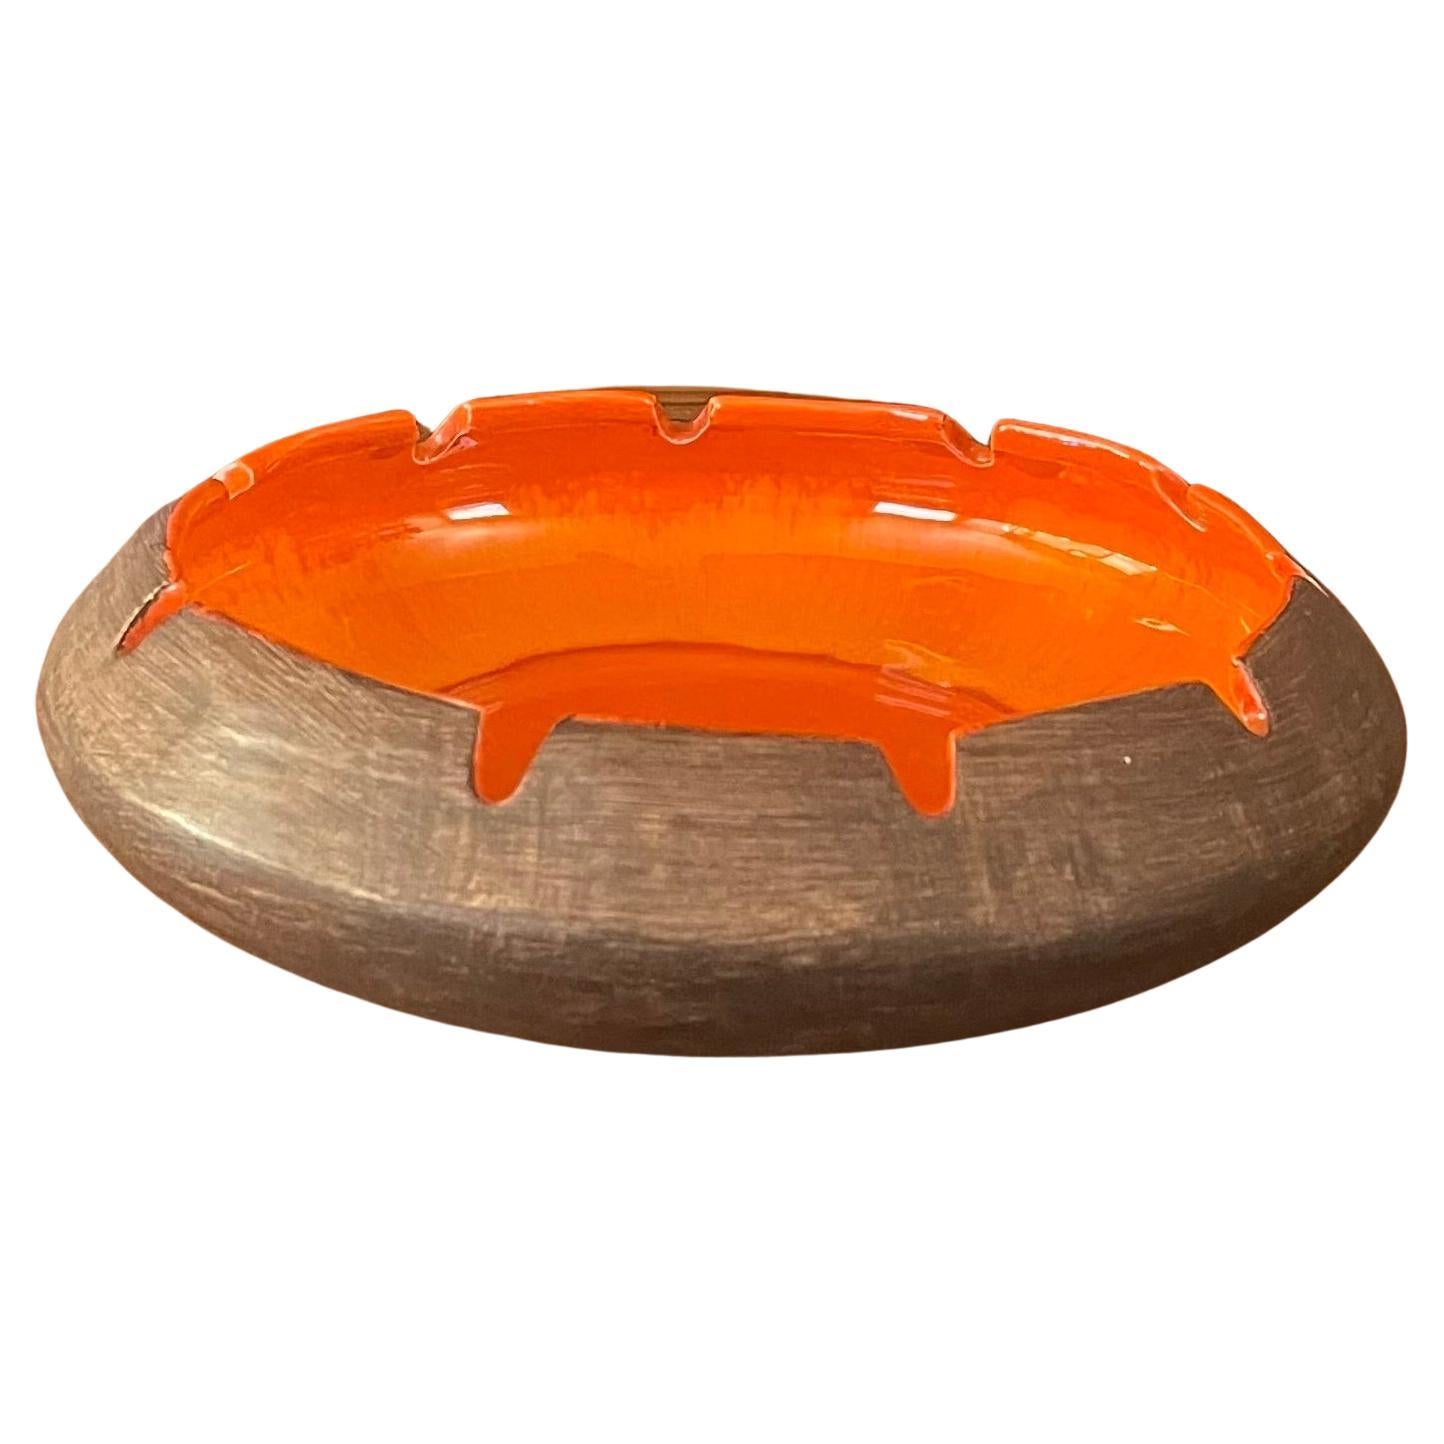 A really nice mid-century modern Italian ceramic ashtray circa 1960s. The piece is in very good vintage condition with no chips, cracks or crazing. The ashtray has a gorgeous bright and shiny orange sunburst glaze on the inside and a mat brown